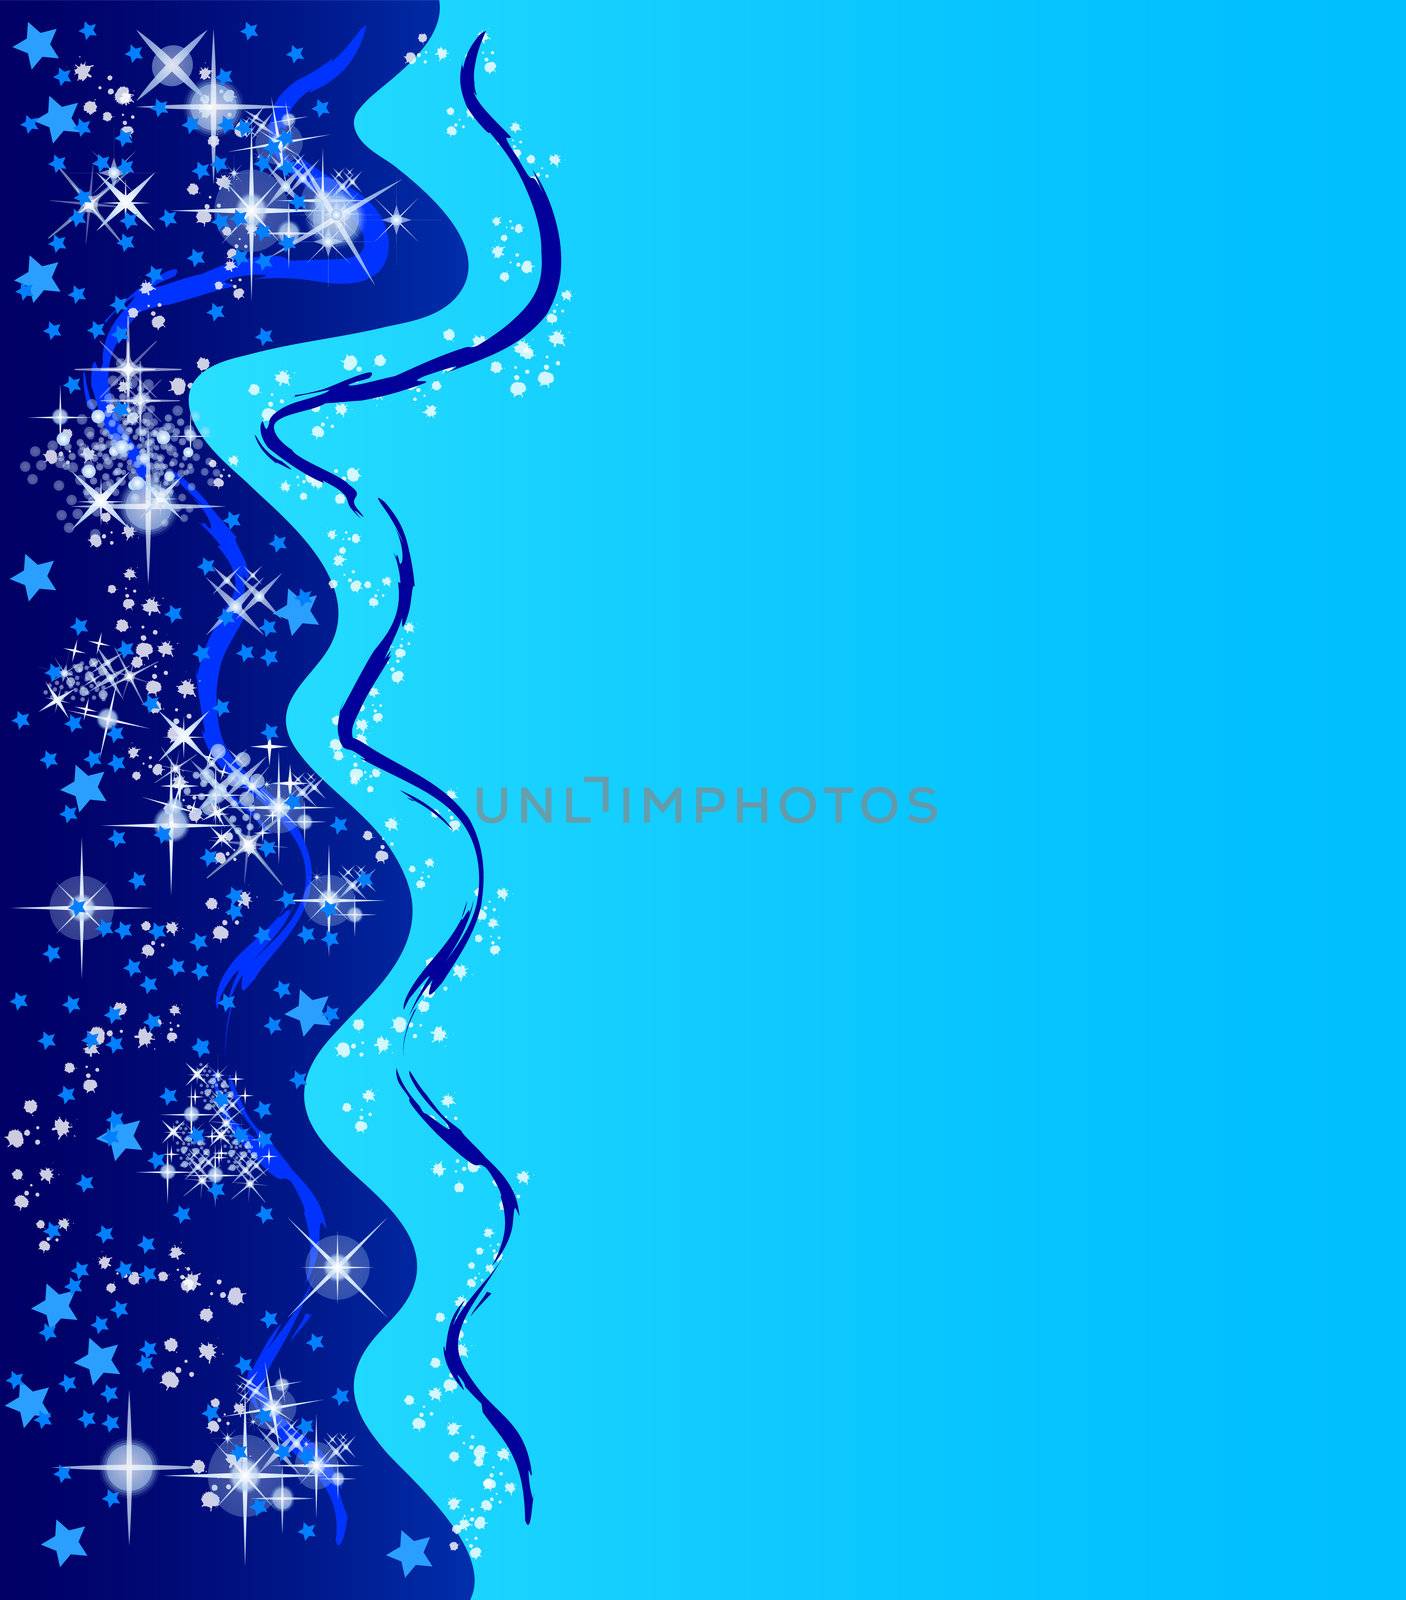 illustration of a abstract christmas background with stars